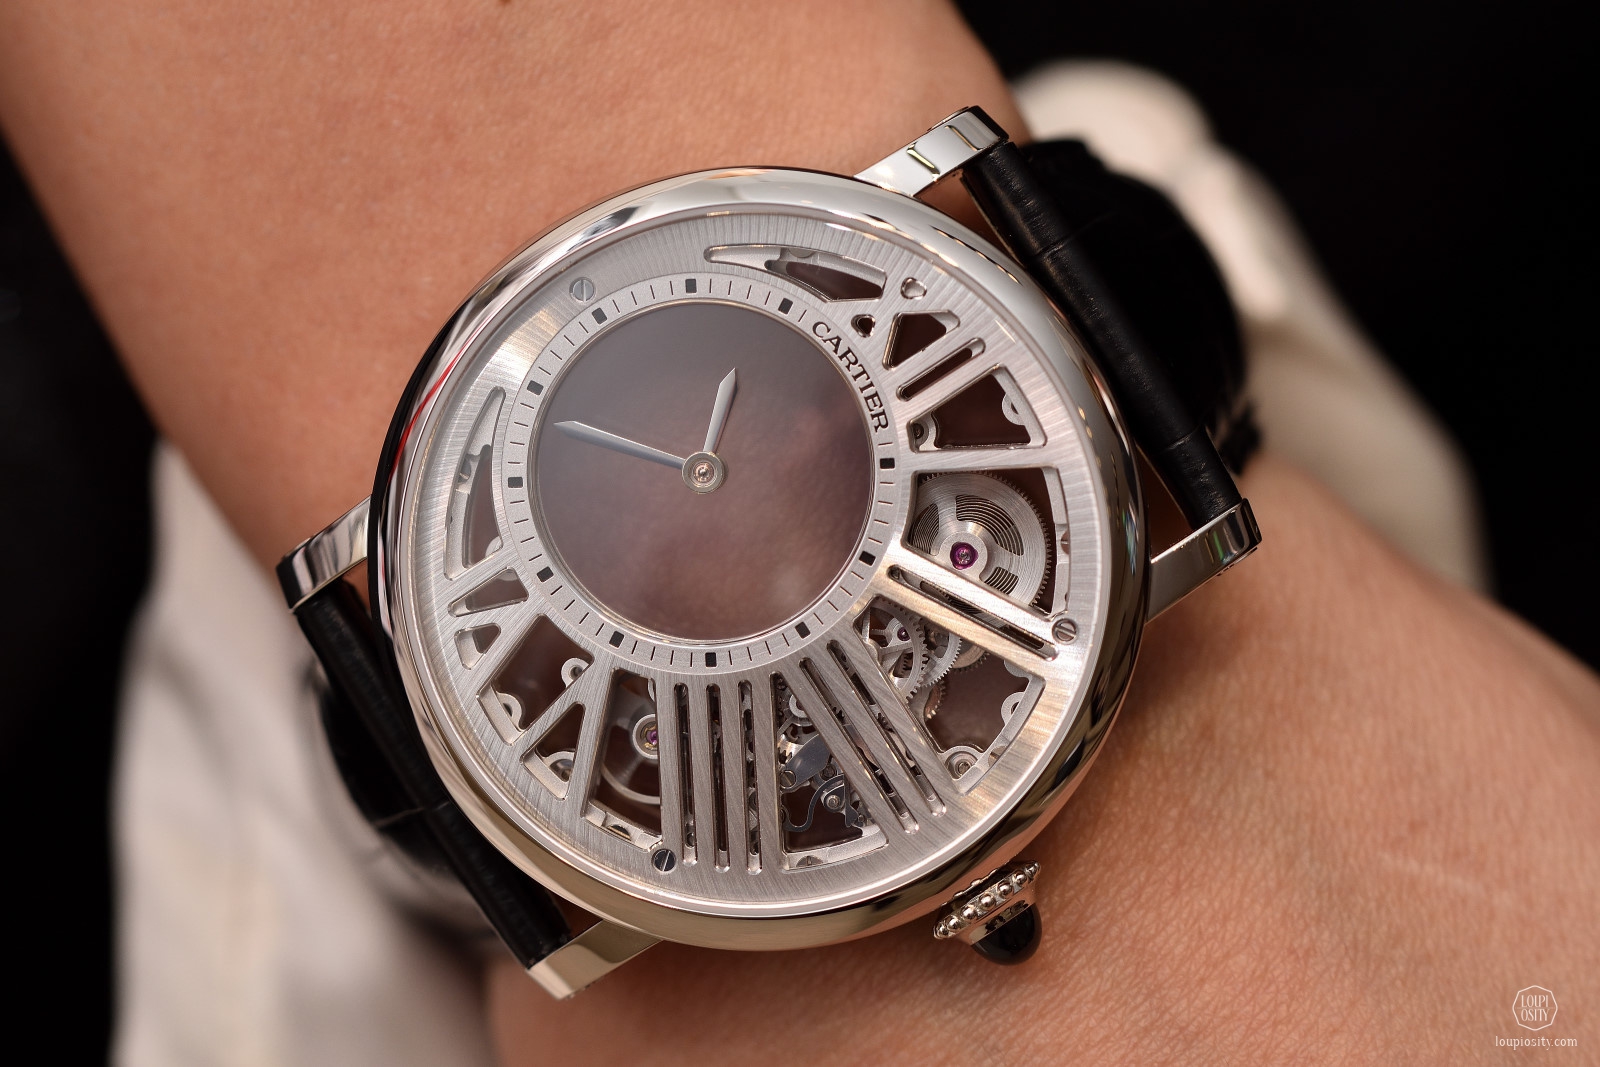 Mystery timepieces by Cartier - Loupiosity.com